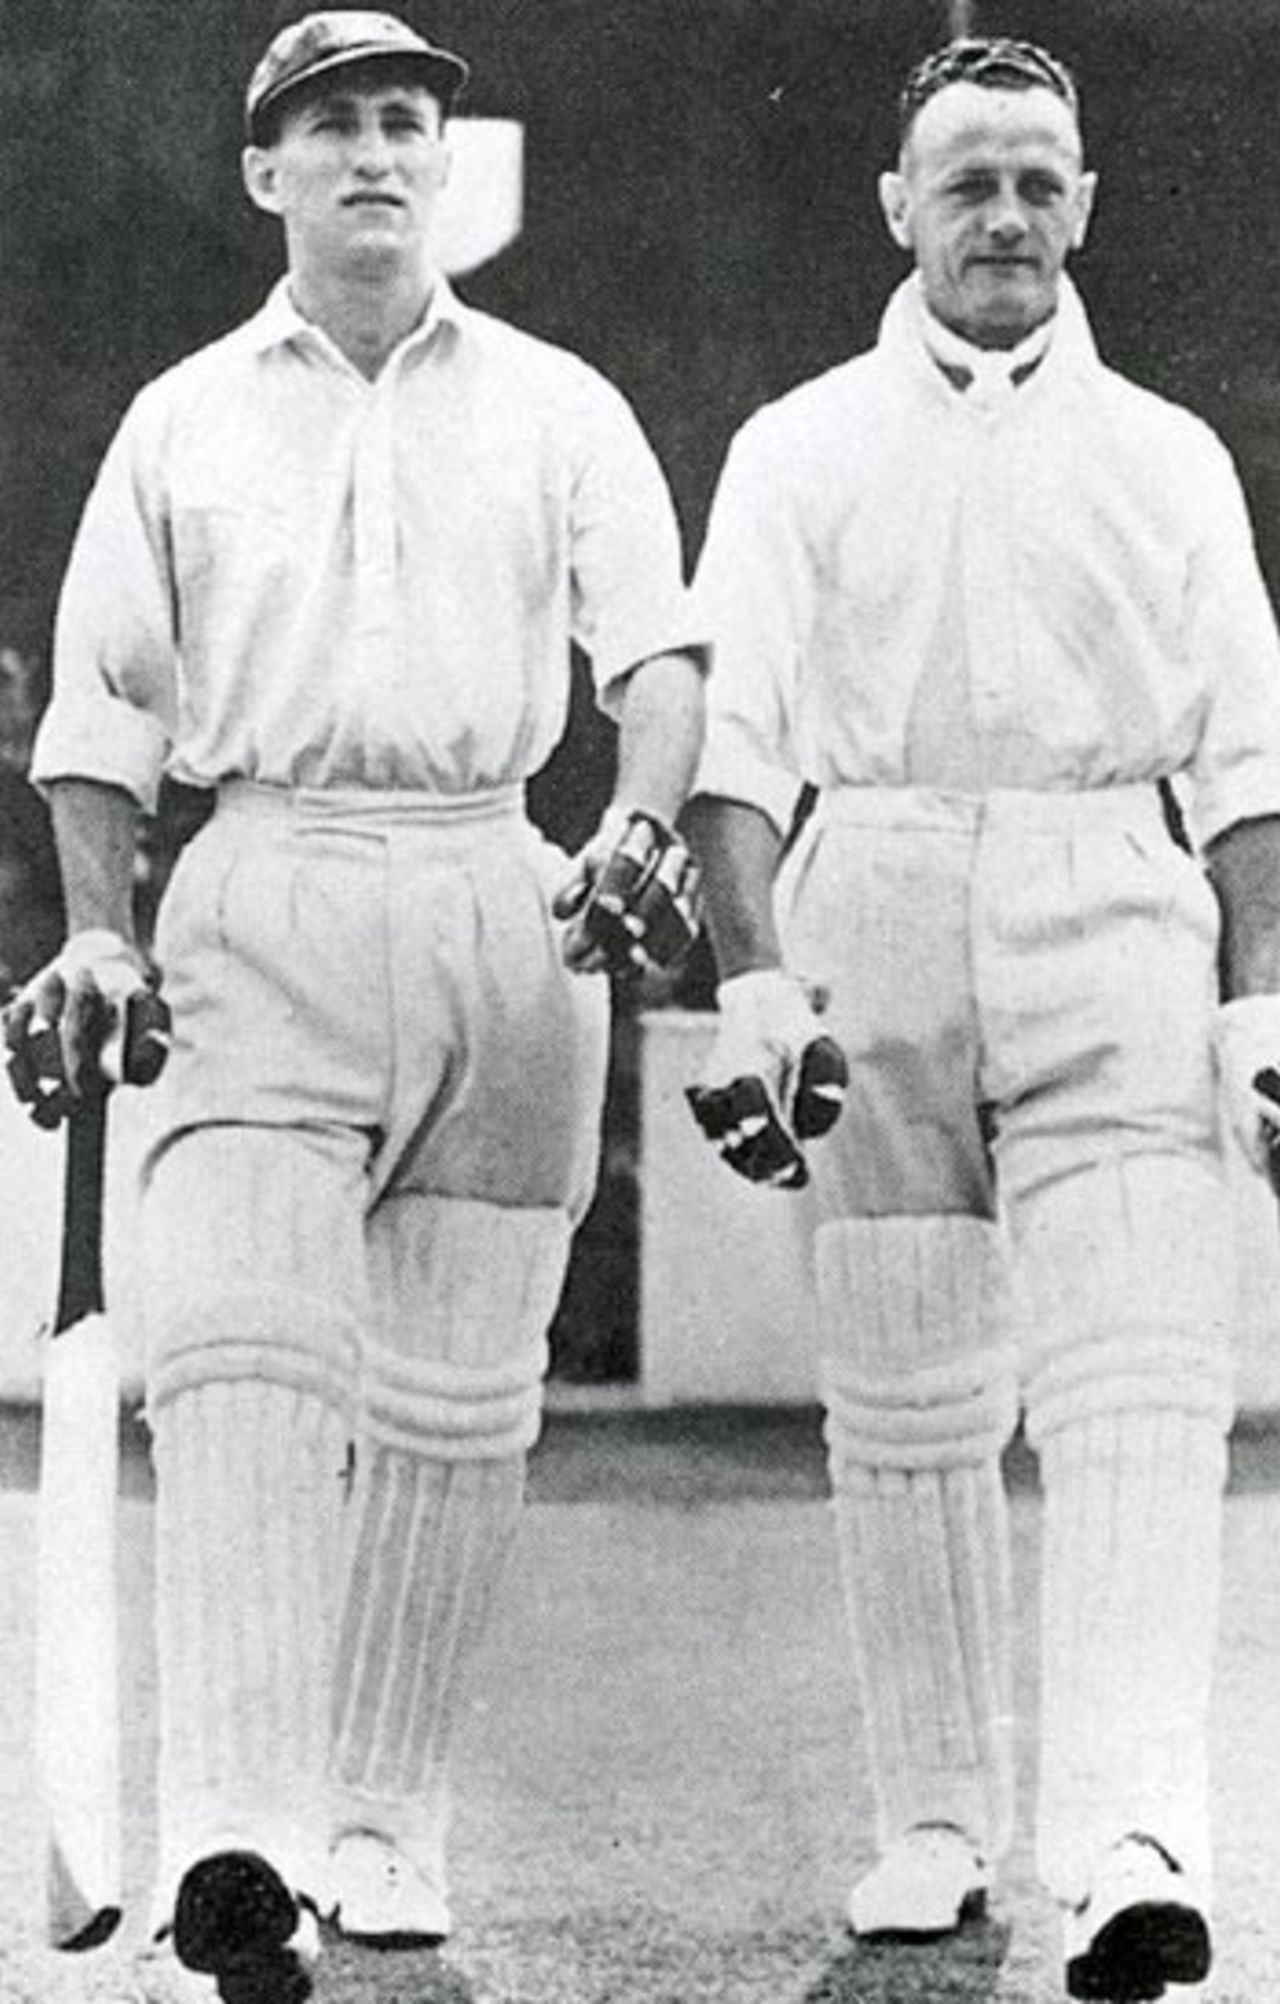 Len Hutton and Walter Keeton walk out to open for England, England v West Indies, 3rd Test, The Oval, August 1939